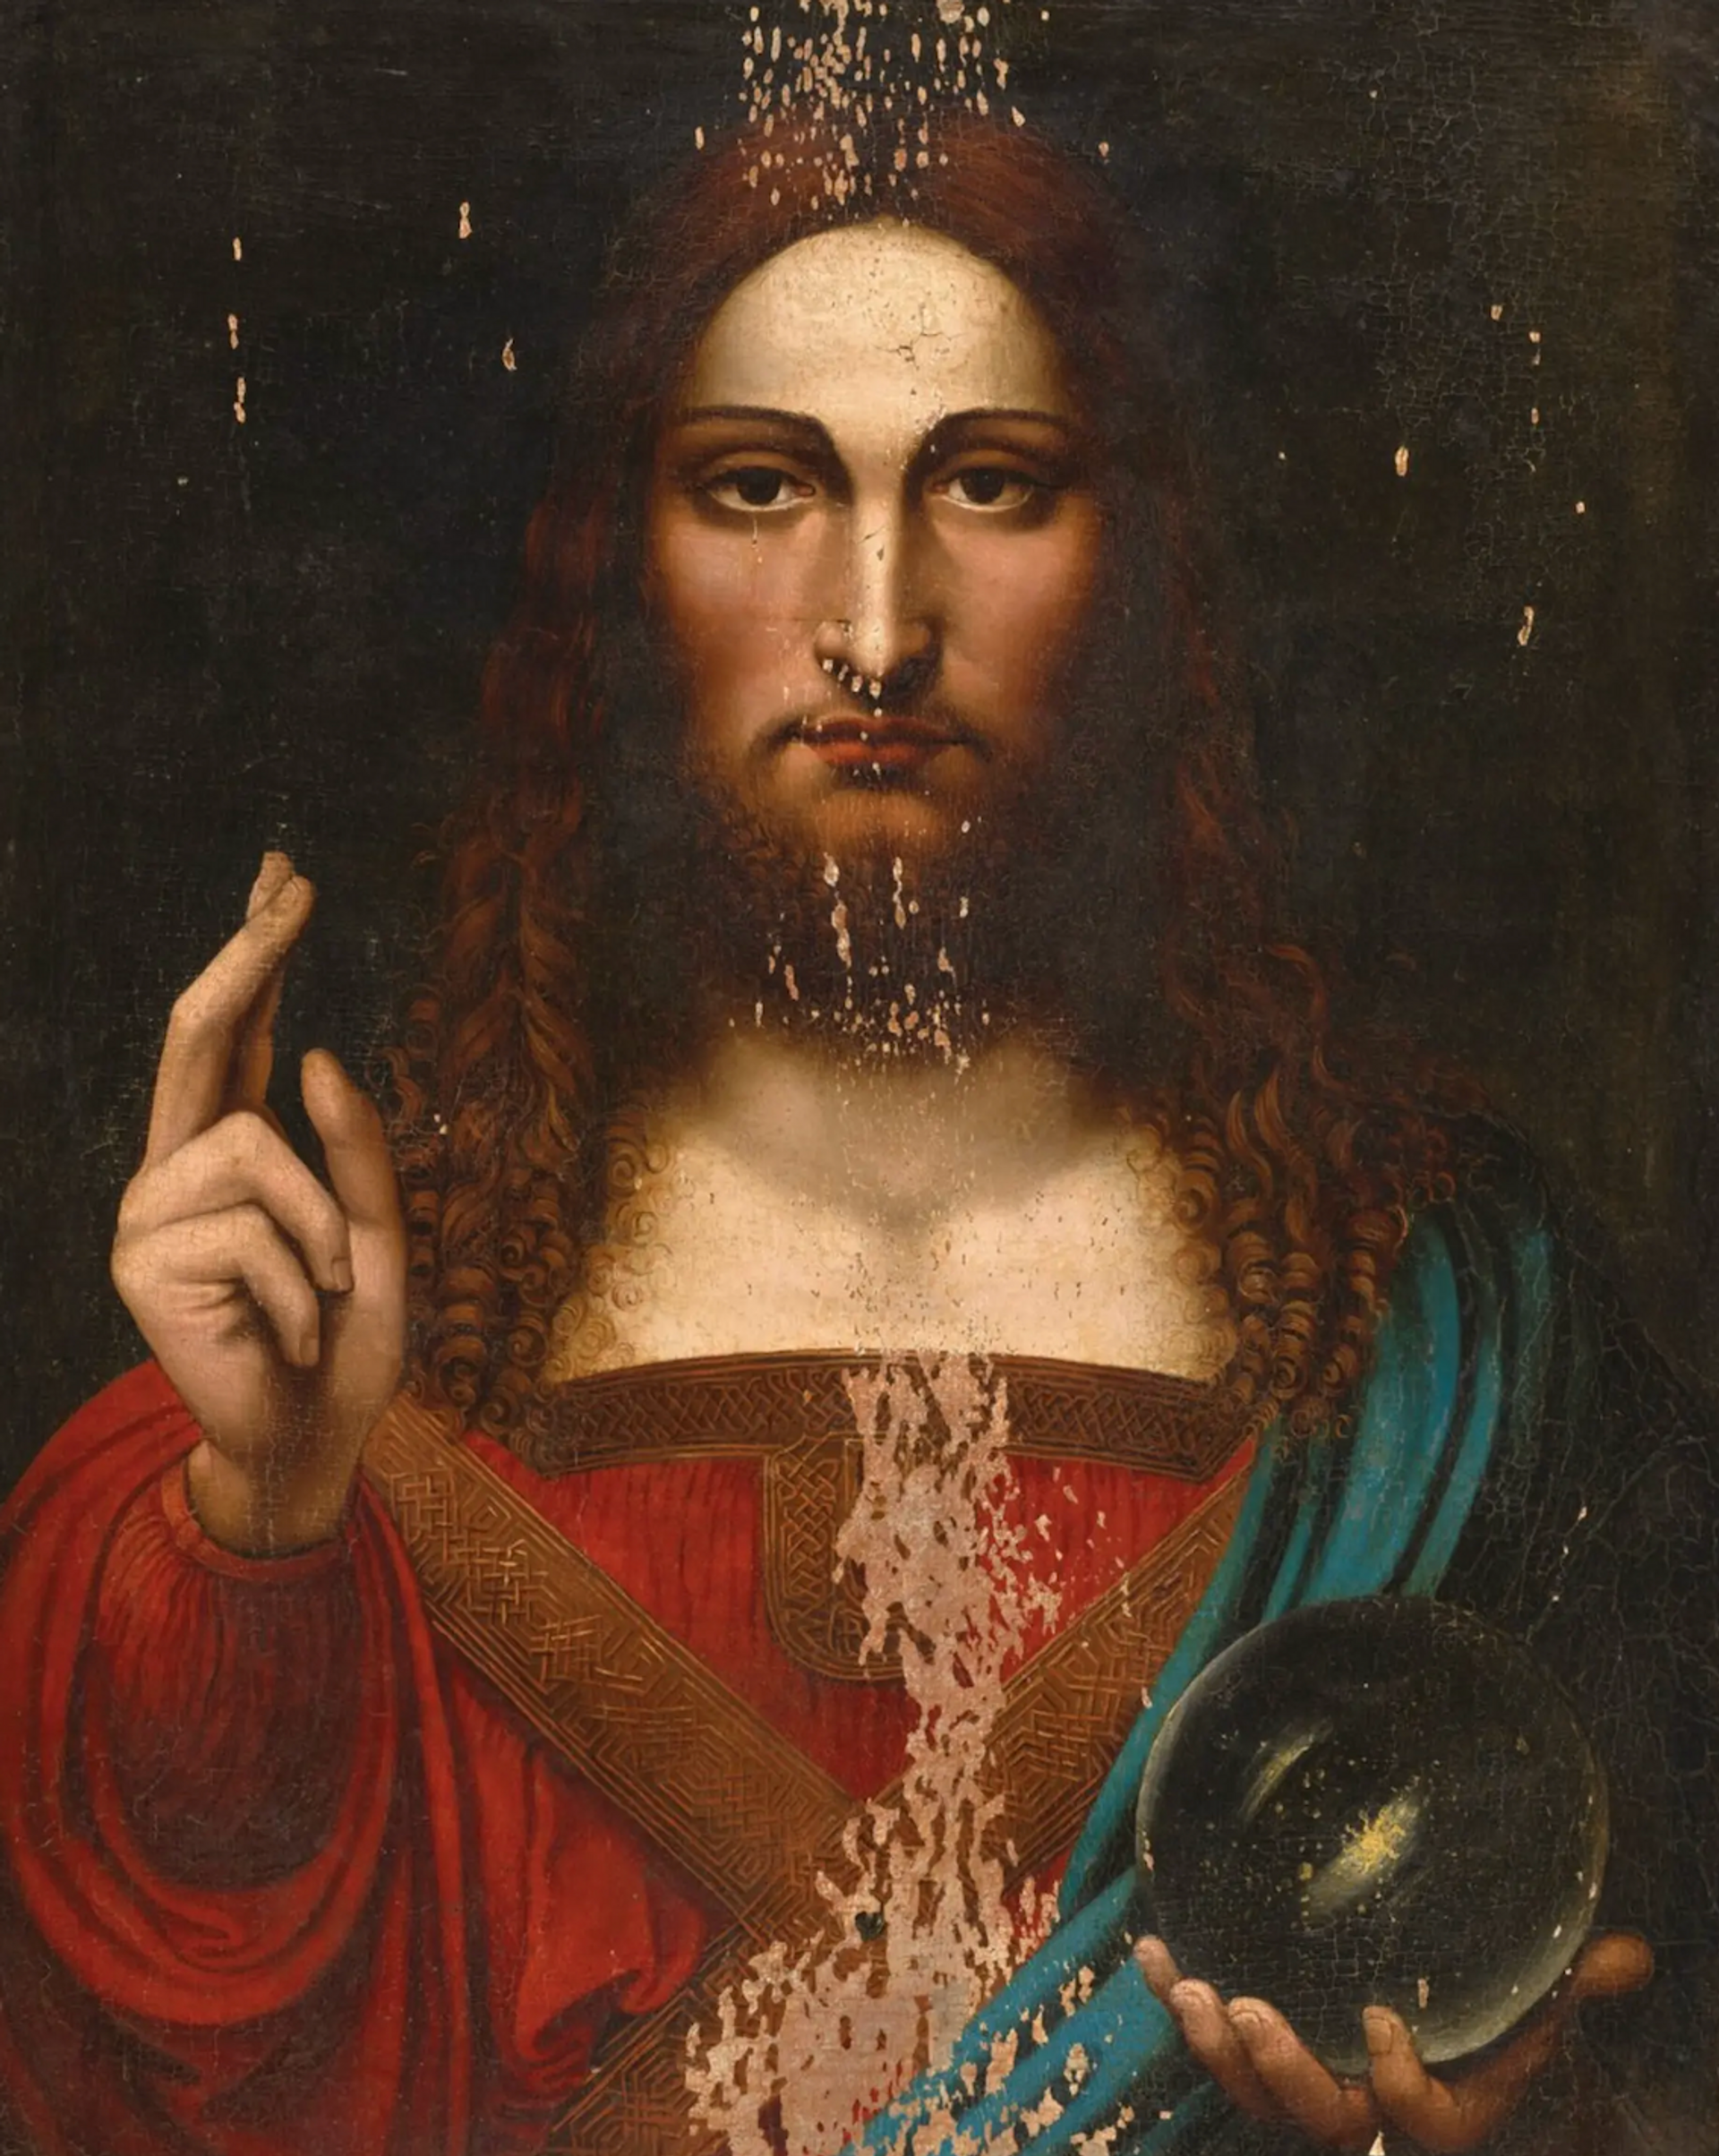 A Salvator Mundi, after Leonardo (around 1600), was sold for €1m at Christie's

Courtesy of Christie's